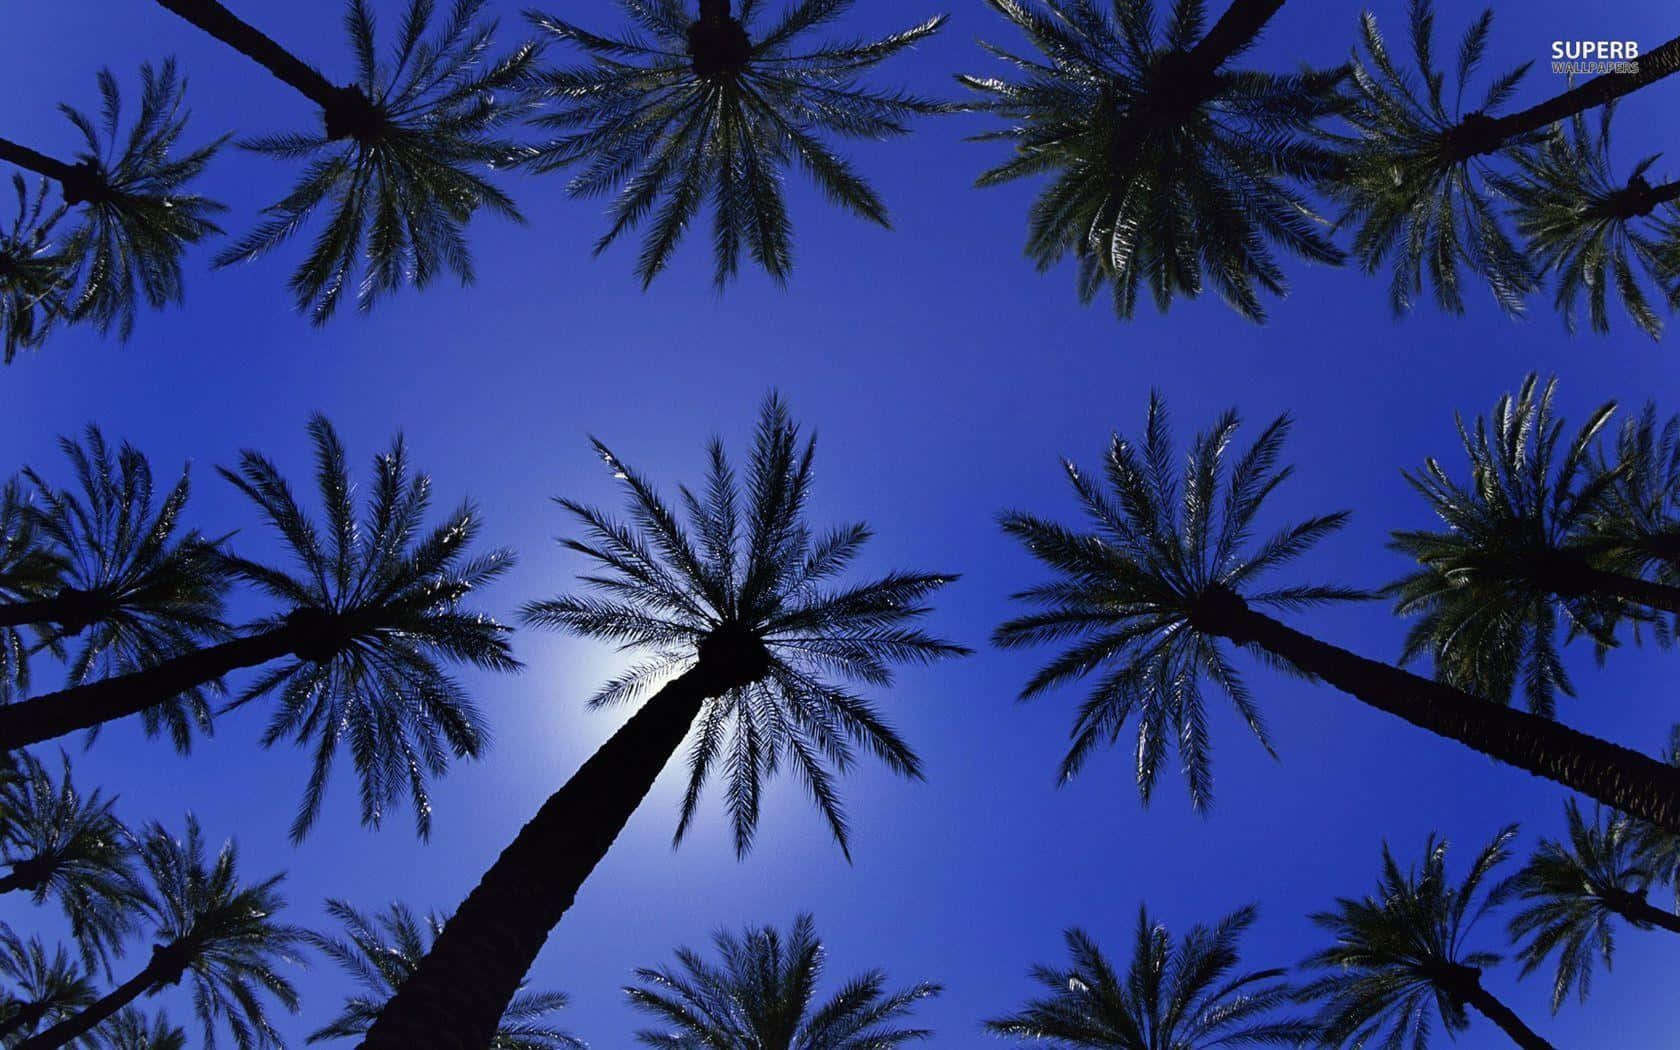 "A peaceful view of a beautiful palm tree against a clear sky."